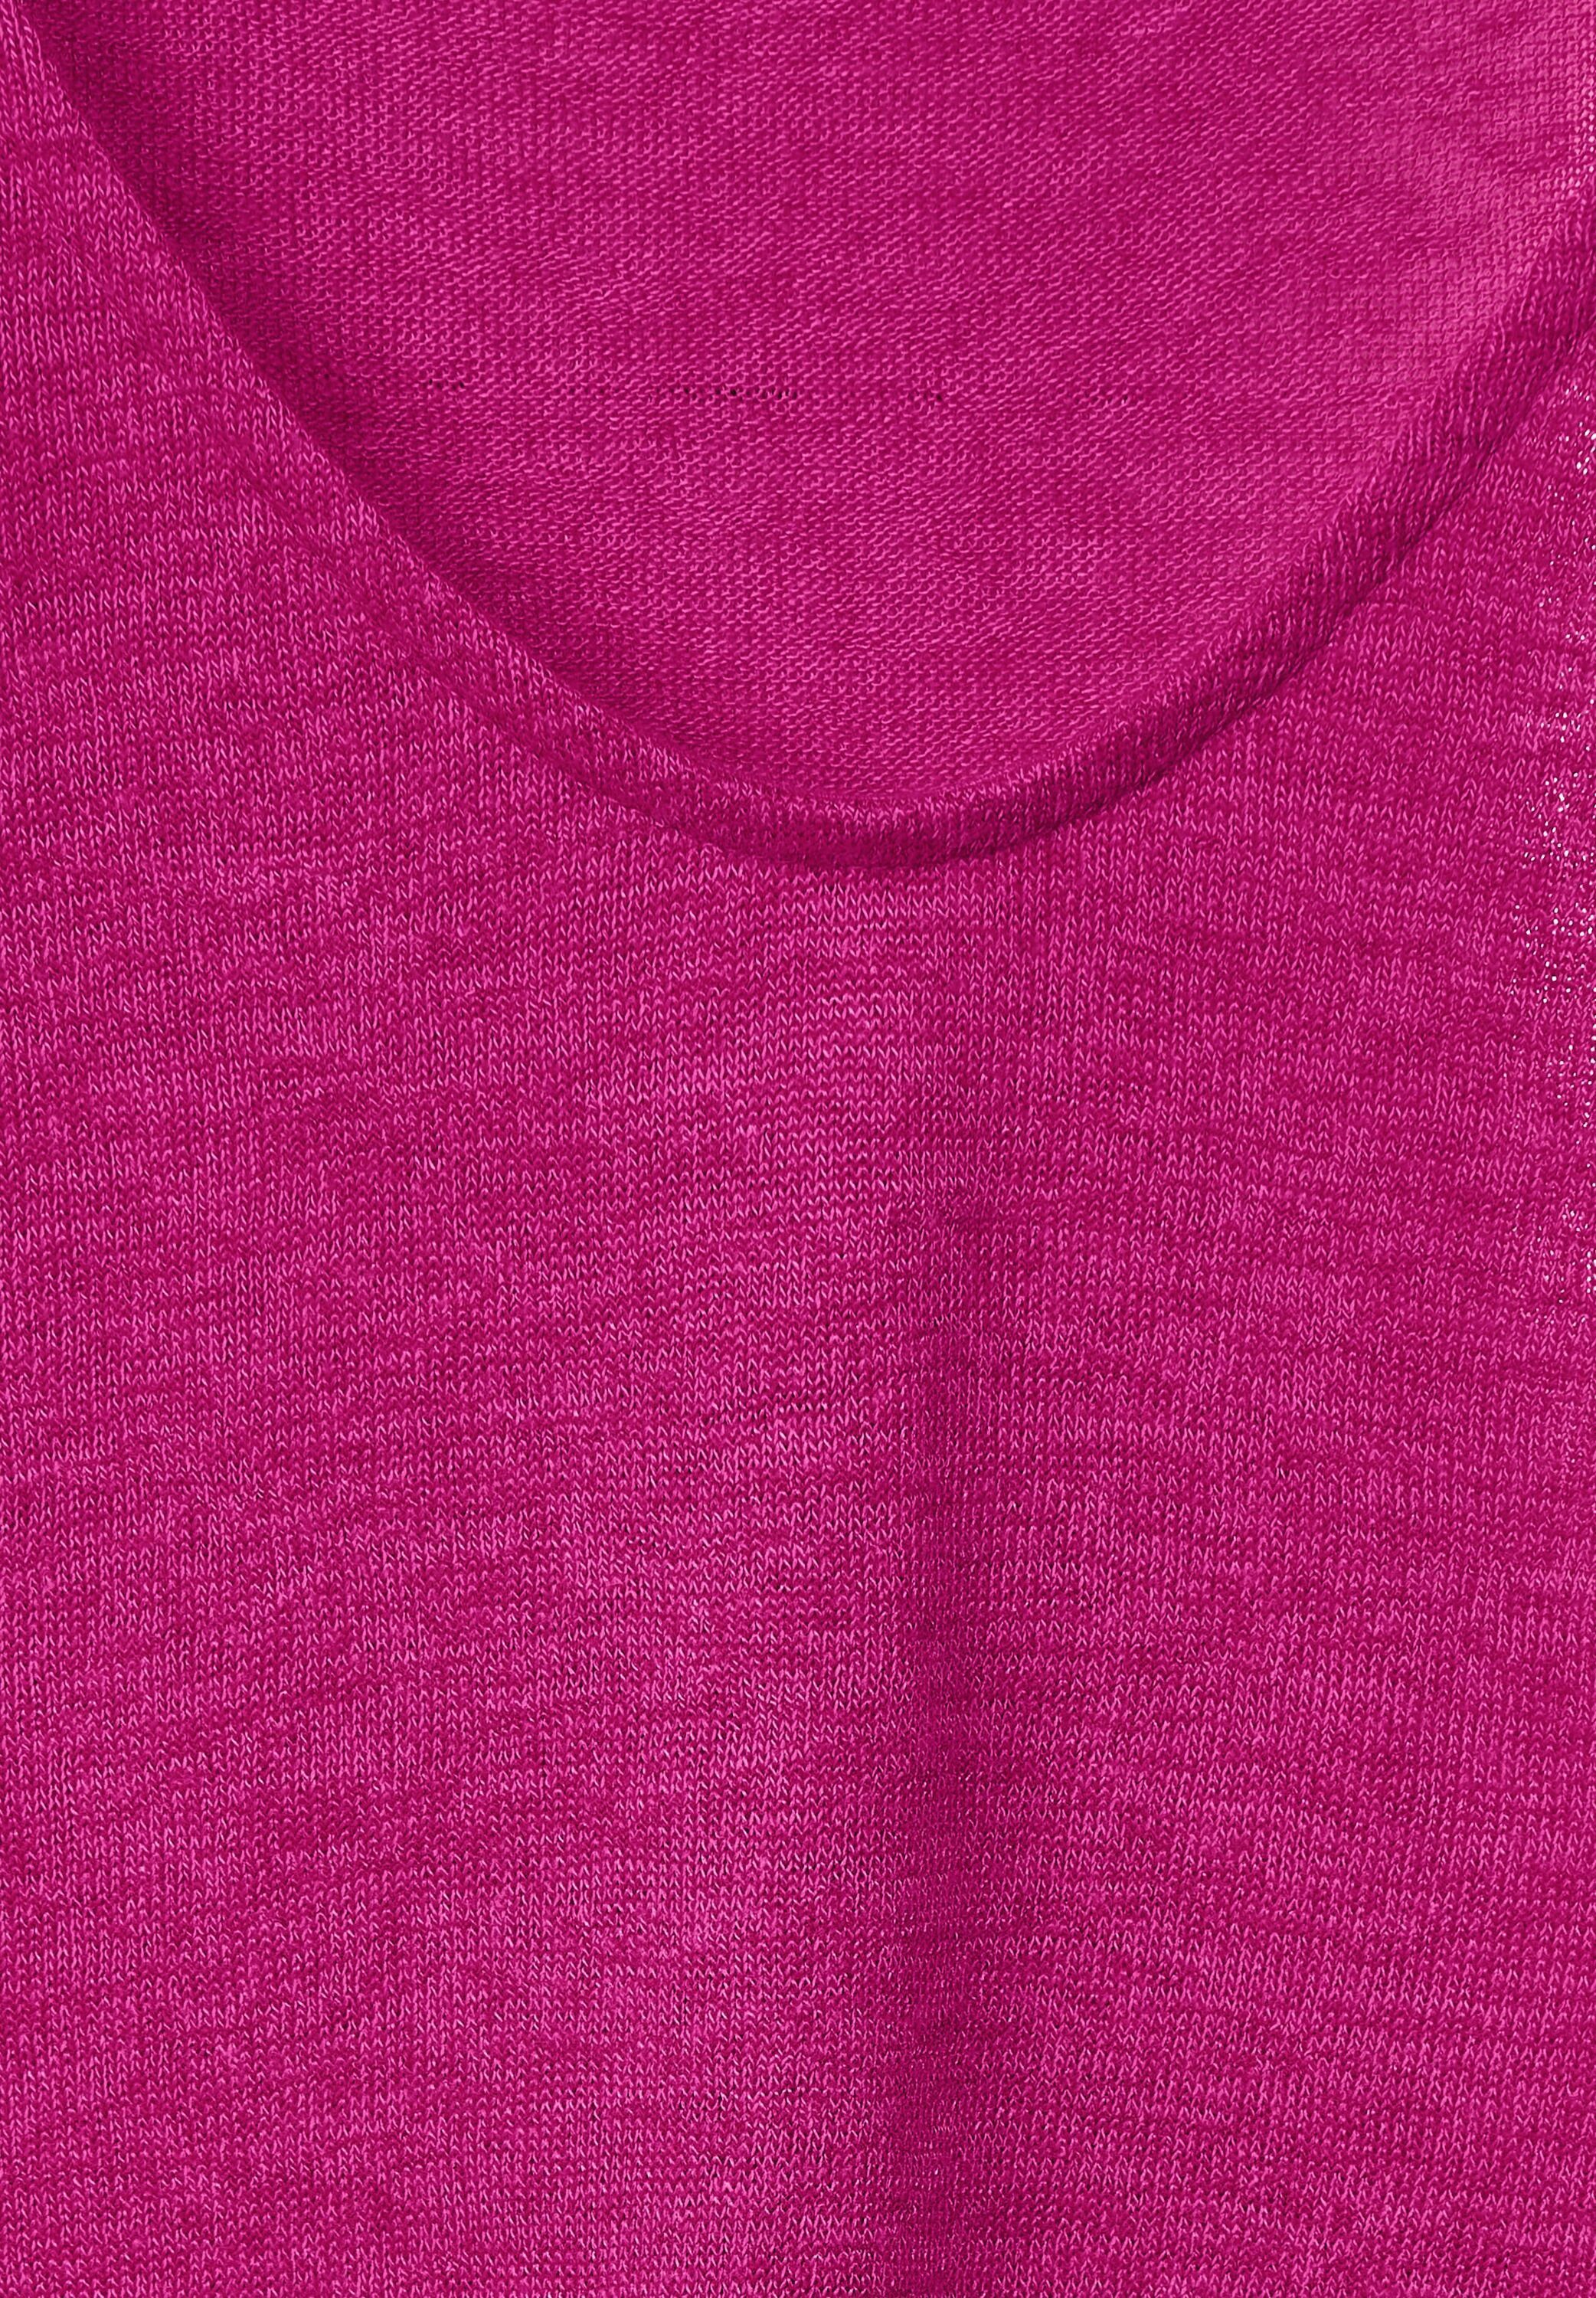 in oasis pink STREET Unifarbe ONE V-Shirt